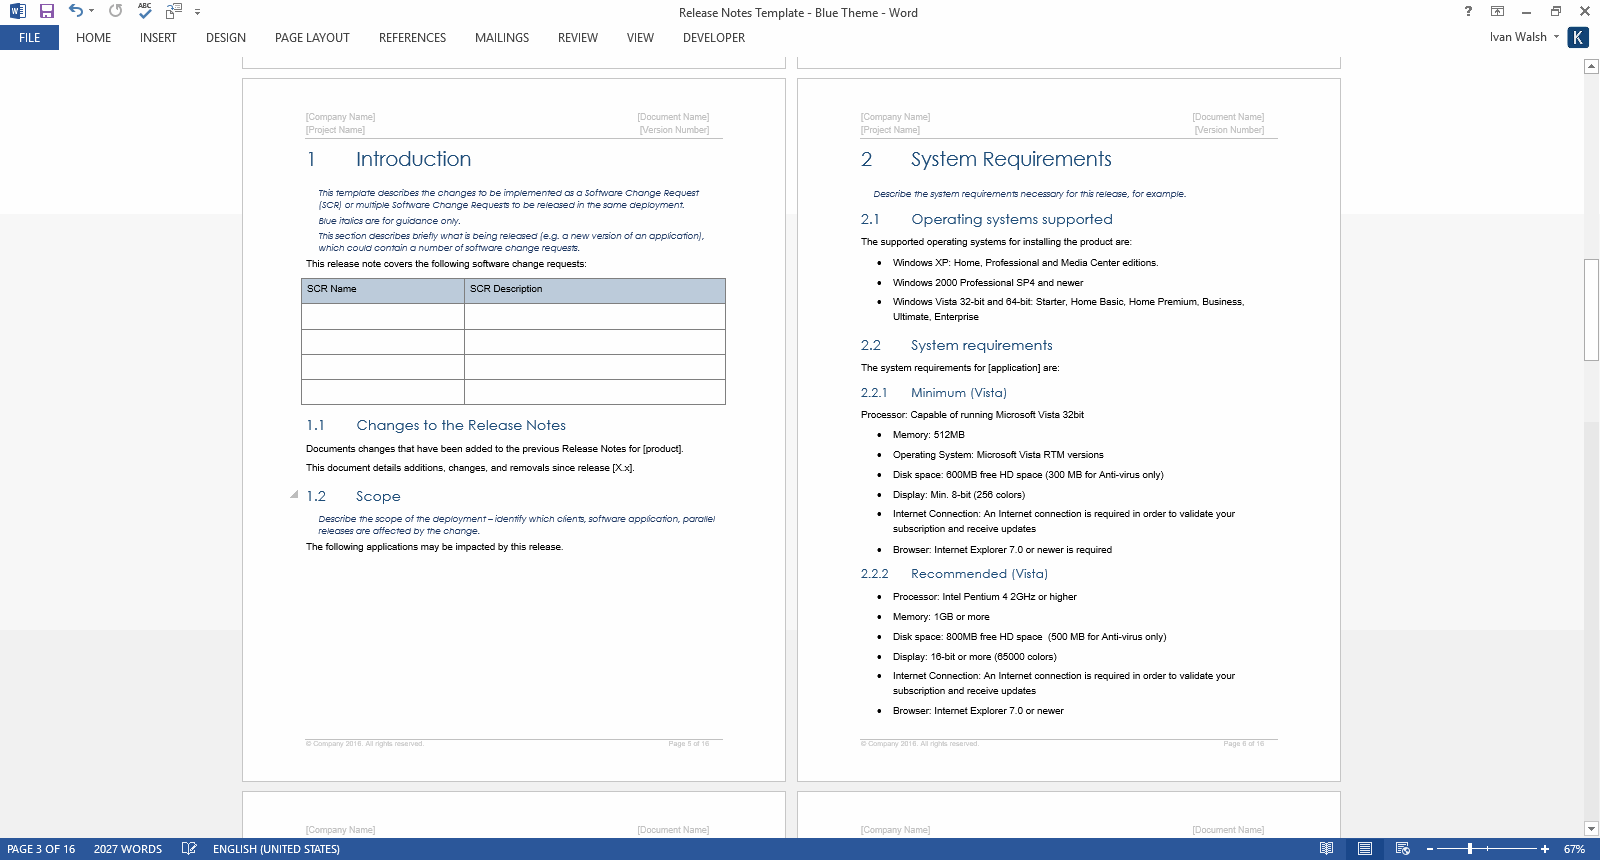 Software Release Notes Document Template